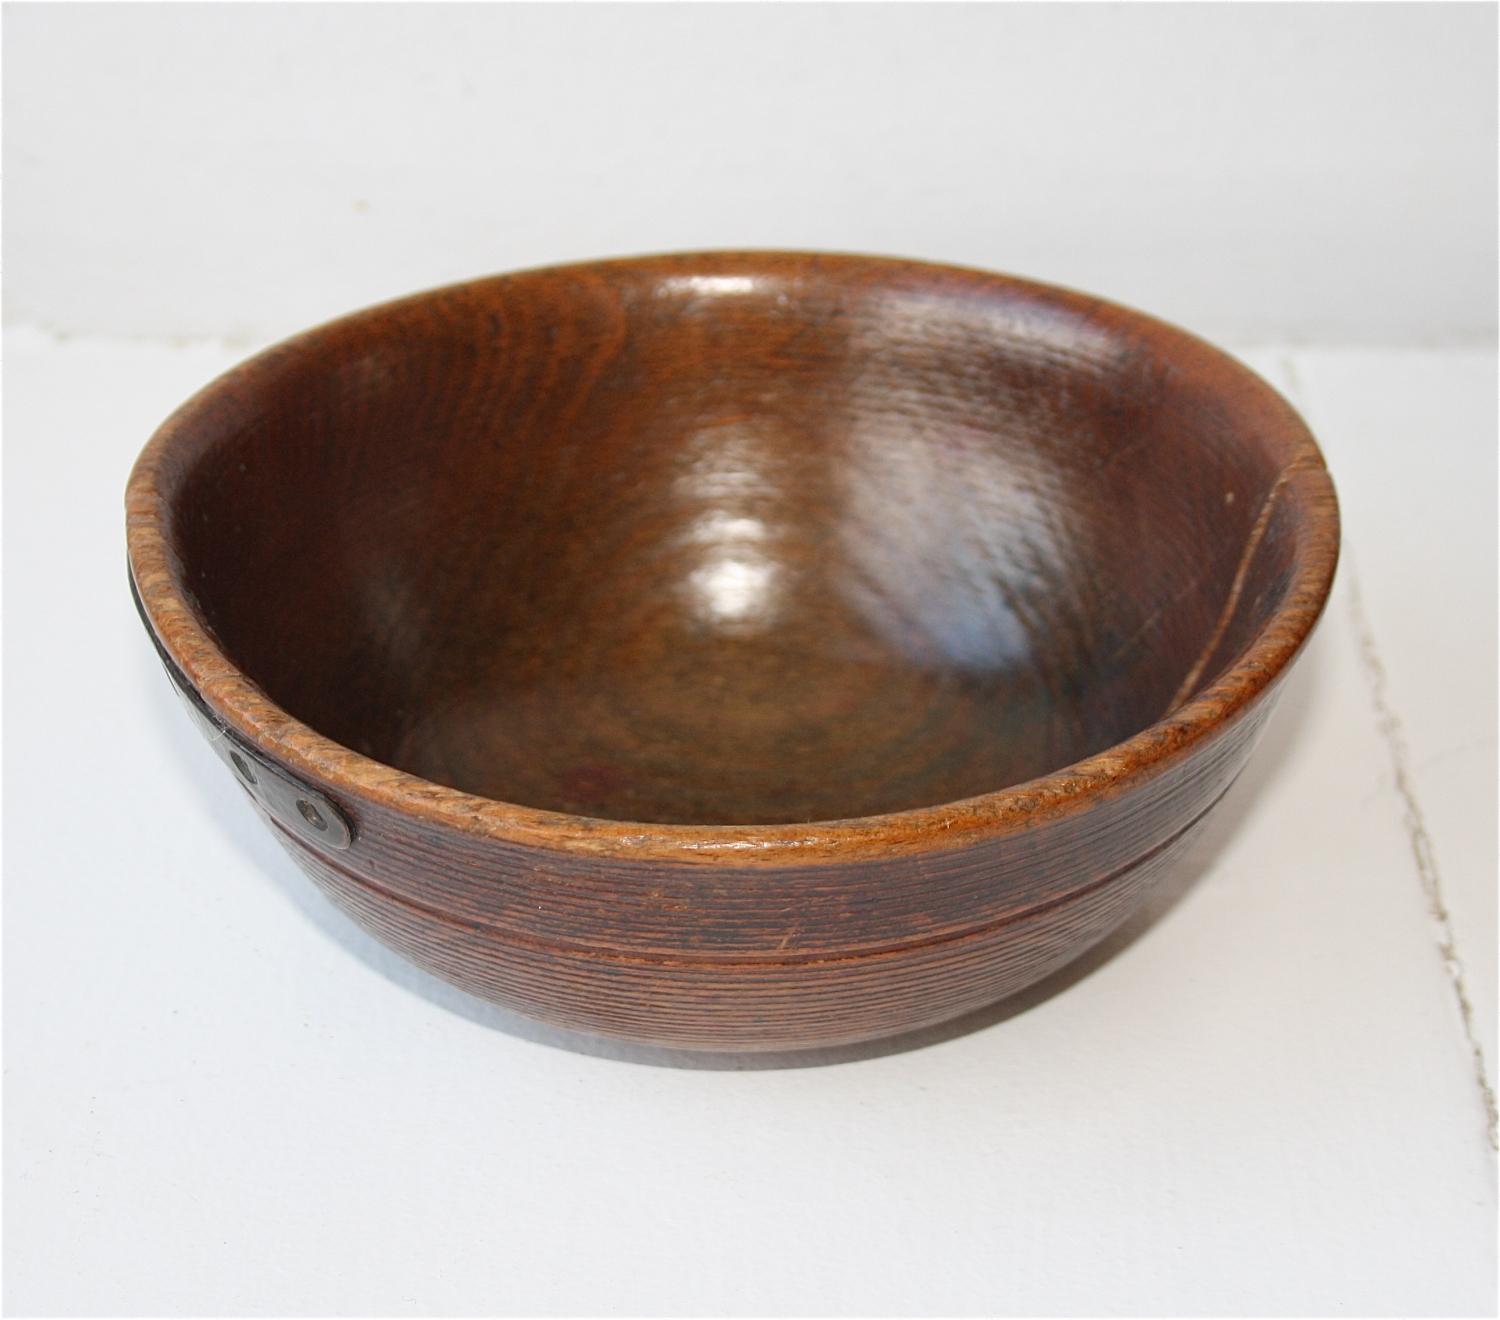 Sycamore bowl - early 1800's